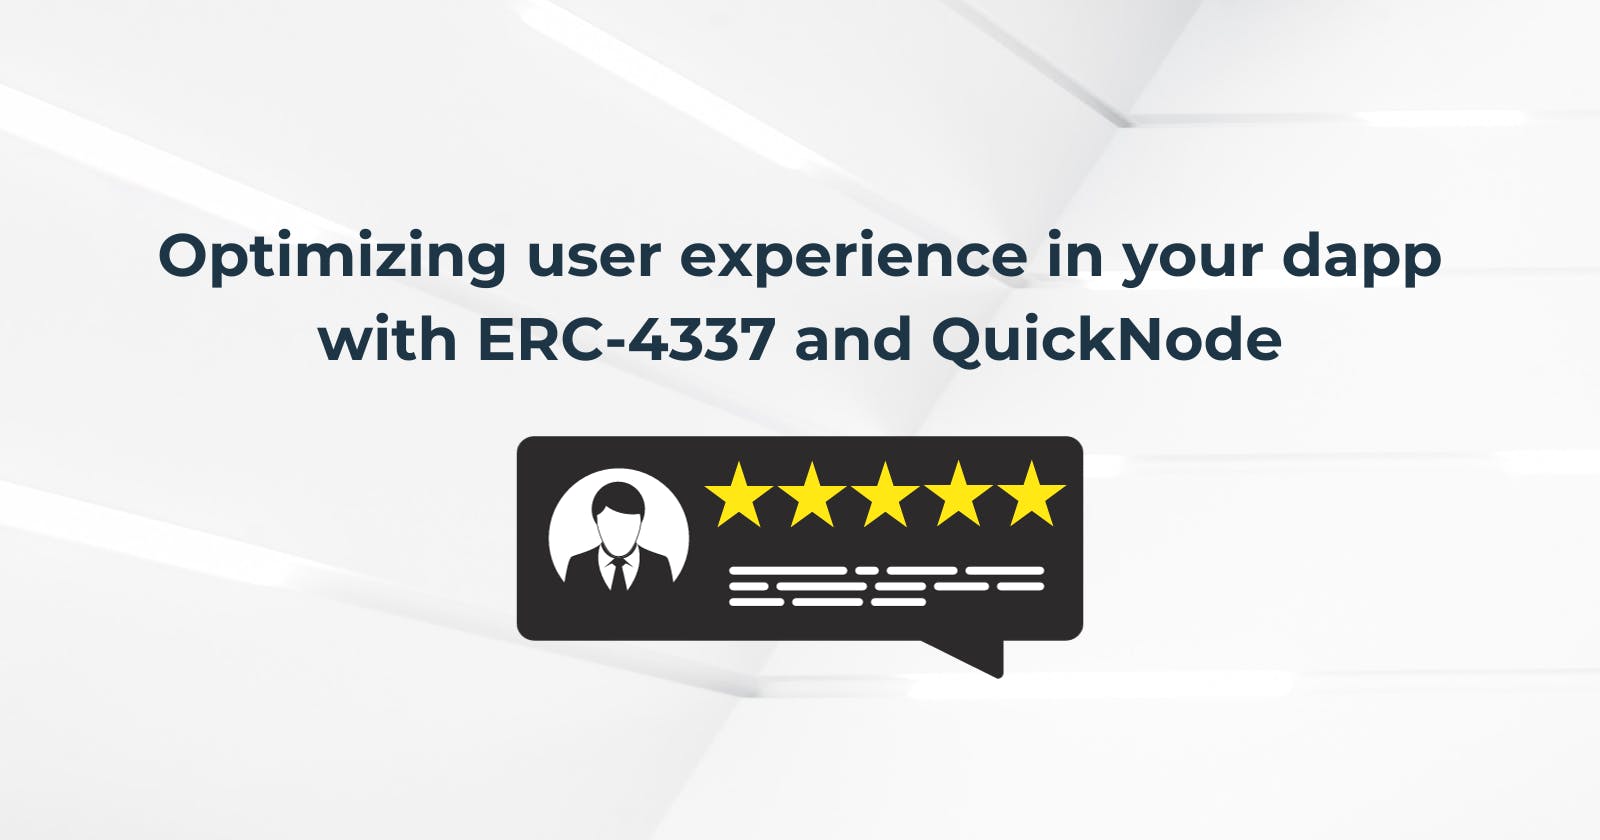 Optimizing user experience in your dapp with ERC-4337 and QuickNode